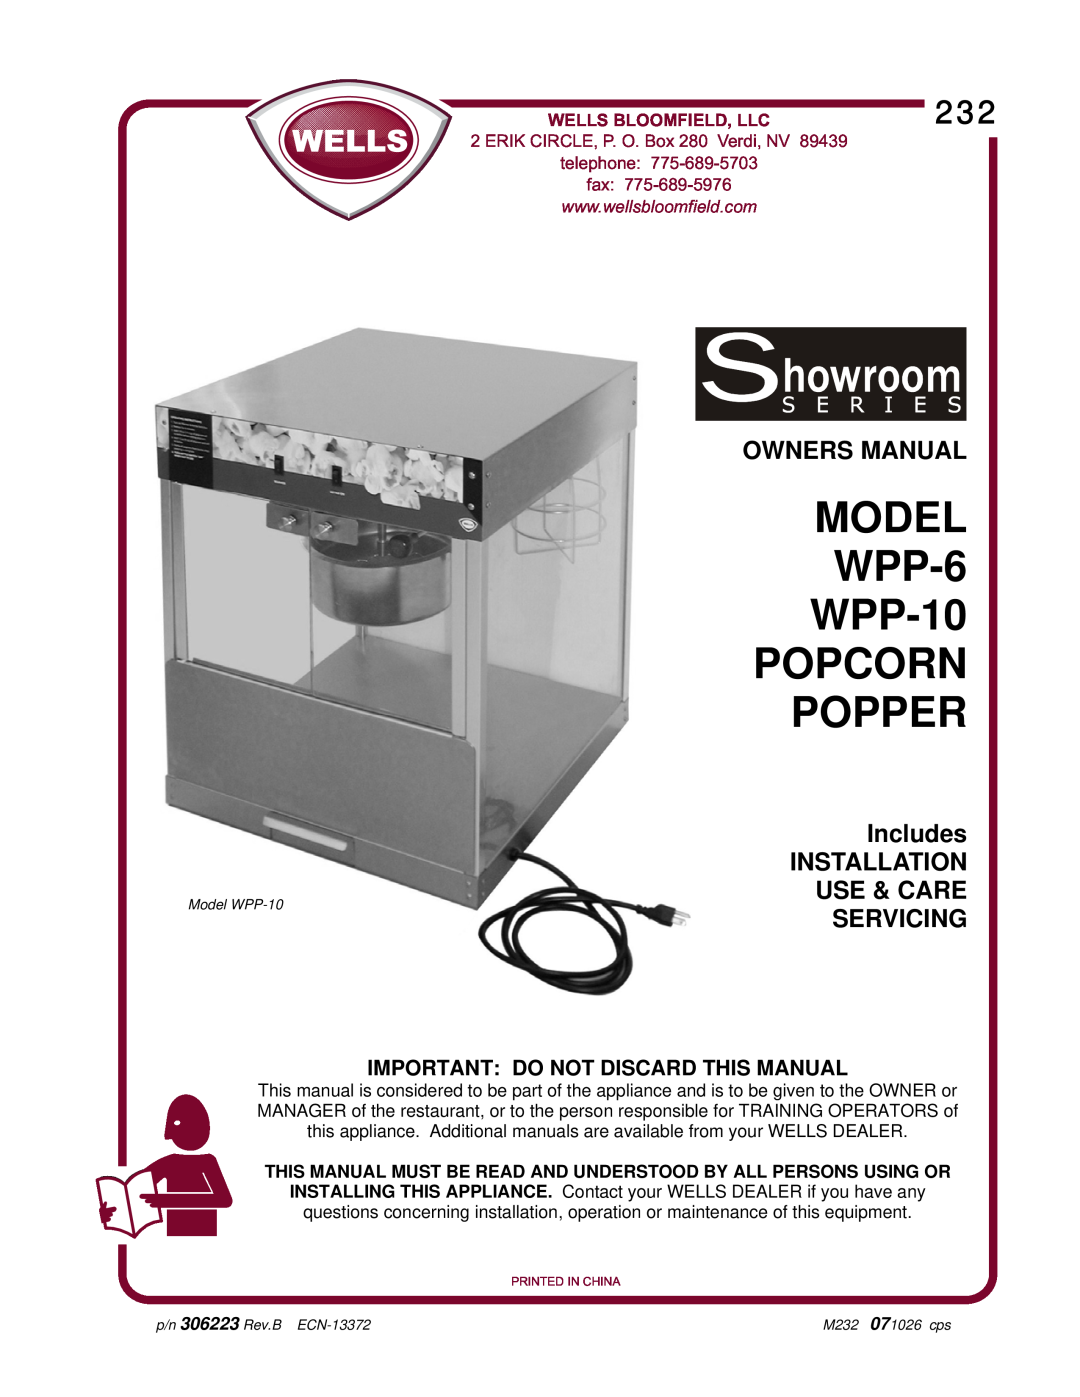 Wells owner manual Important Do Not Discard This Manual, Wells Bloomfield, Llc, MODEL WPP-6 WPP-10 POPCORN POPPER 